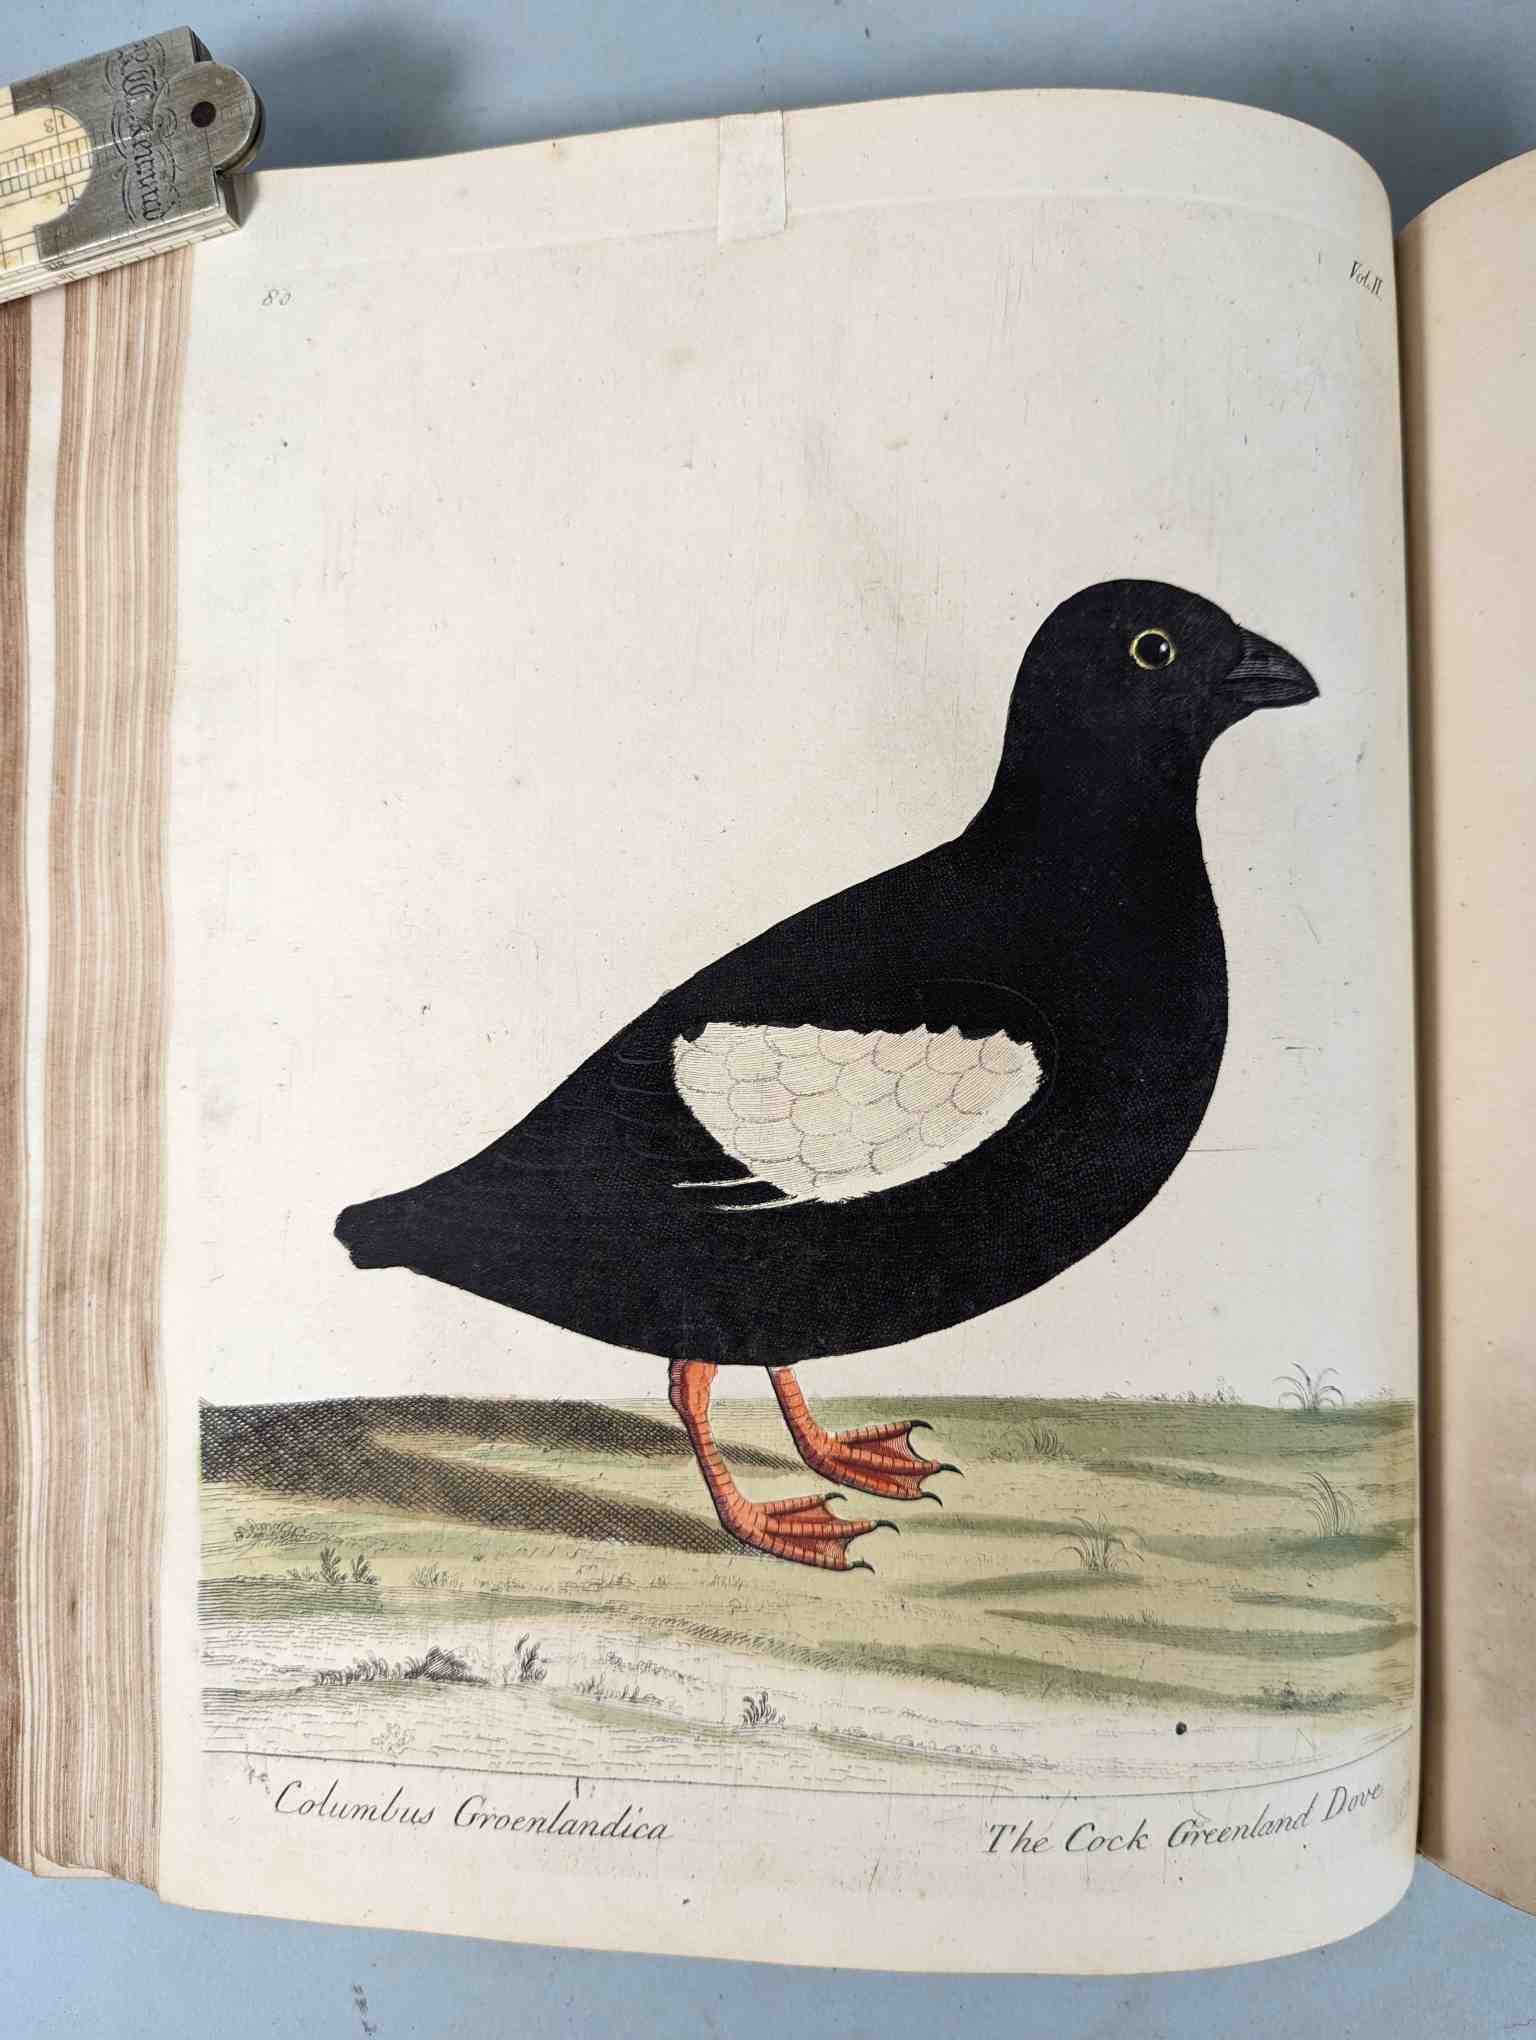 ALBIN, Eleazar. A Natural History of Birds, to which are added, Notes and Observations by W. - Image 184 of 208